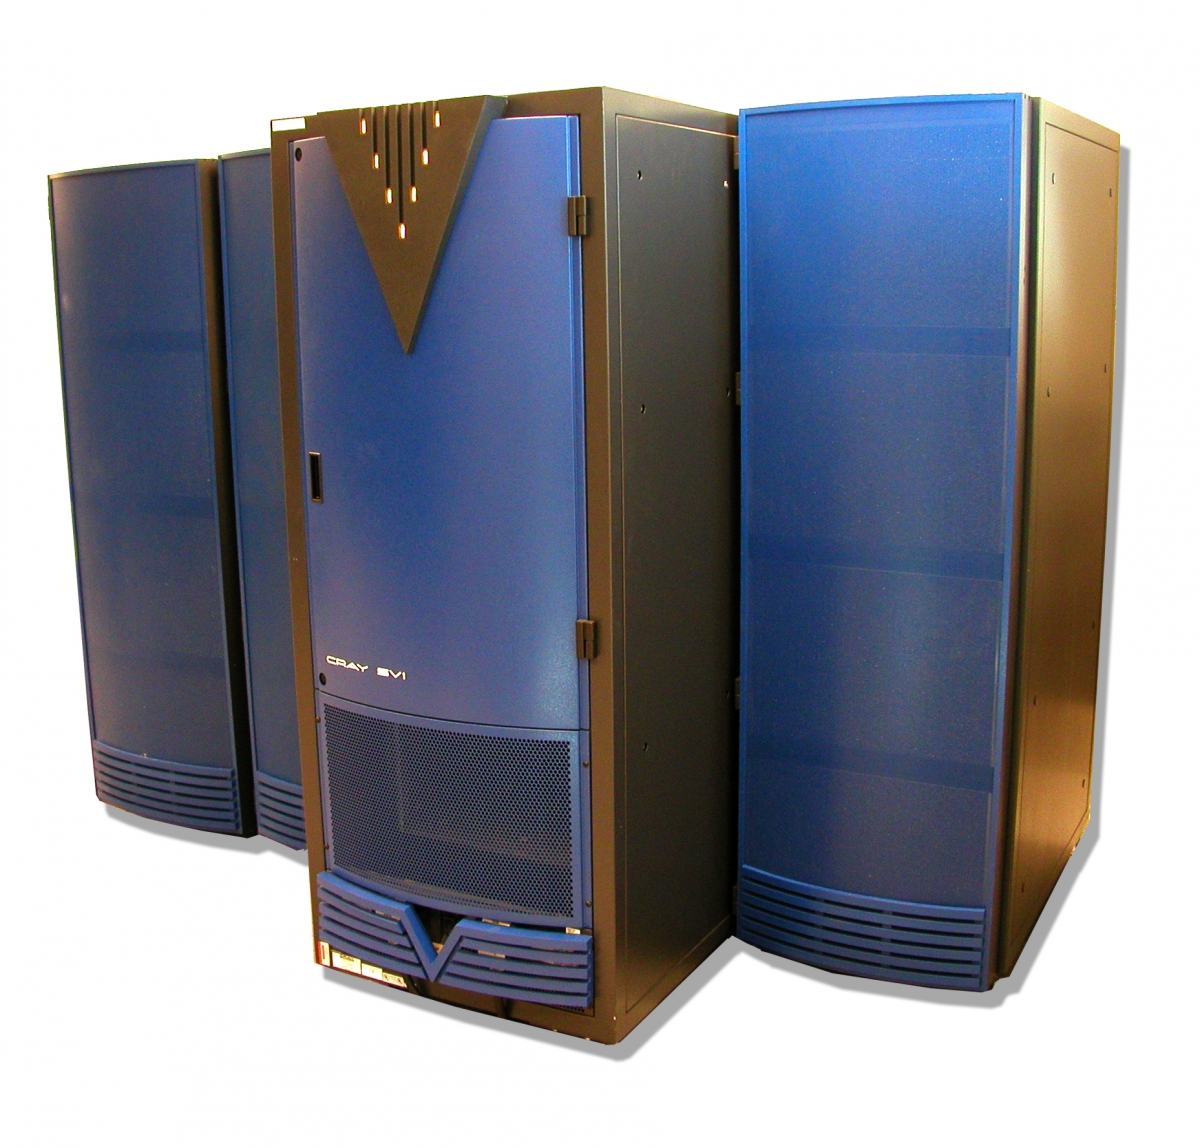 Press photo of a Cray SV-1 system